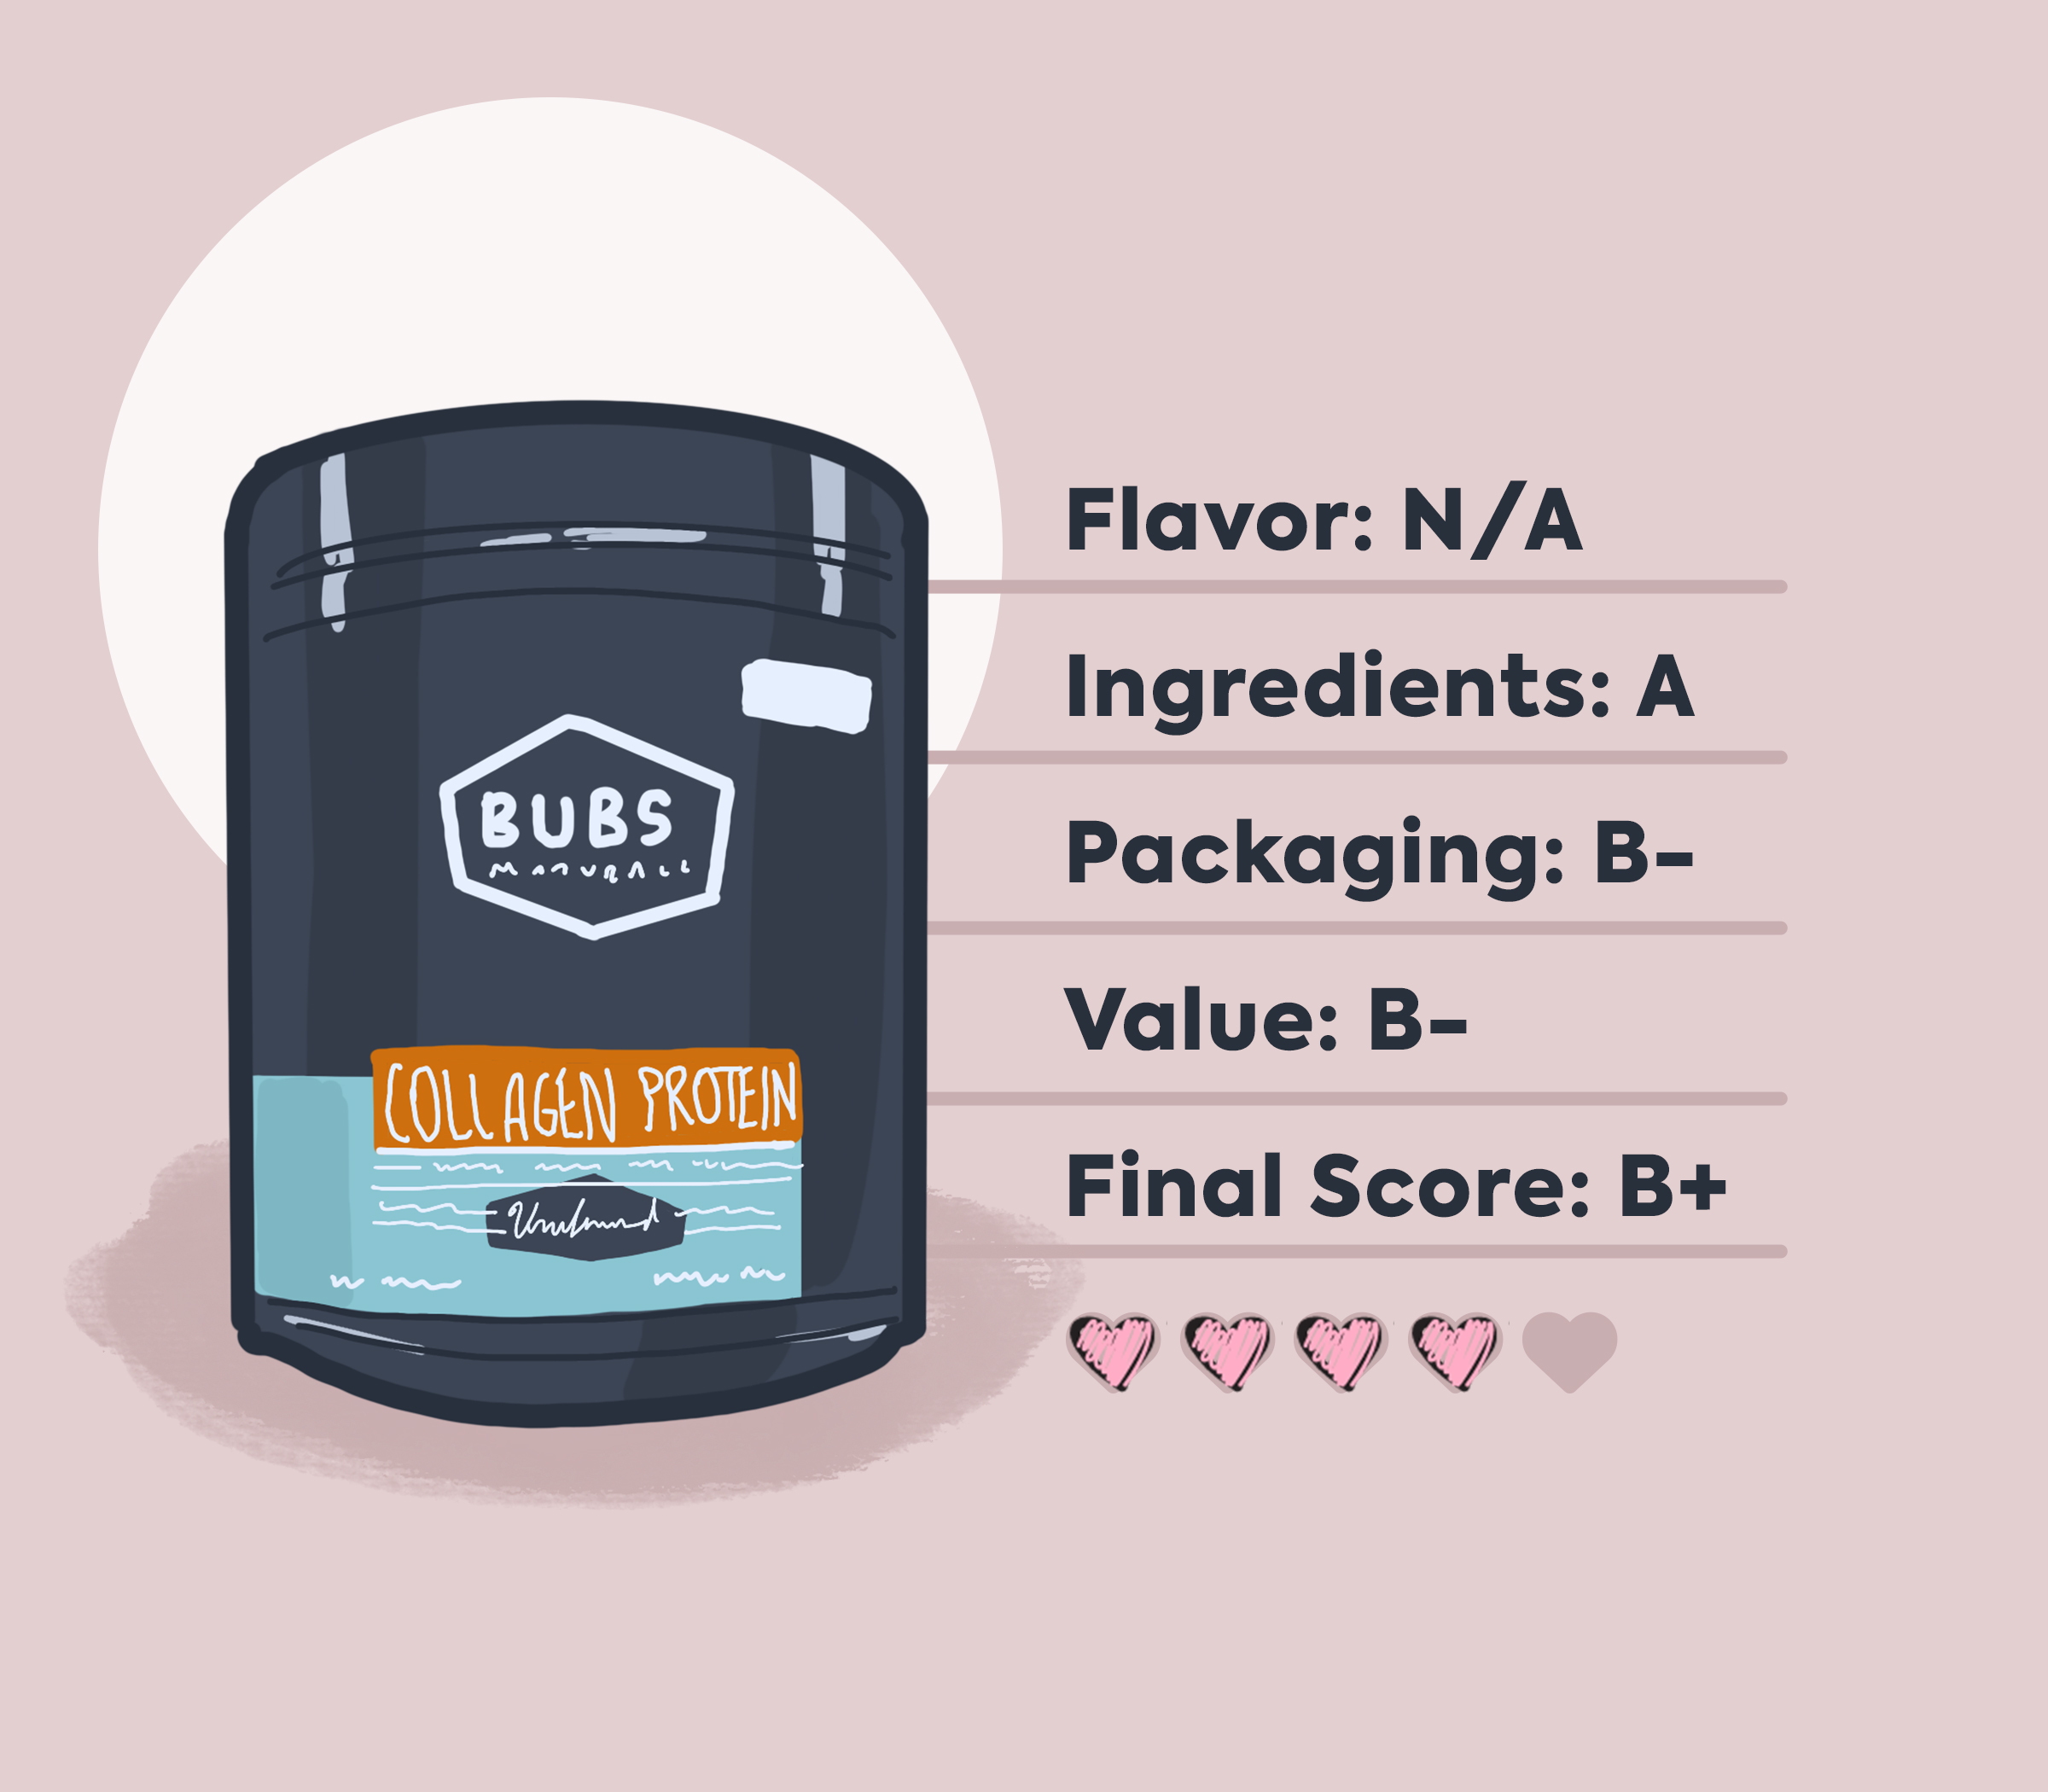 bubs naturals collagen review graphic featuring hand-drawn illustration, and product information